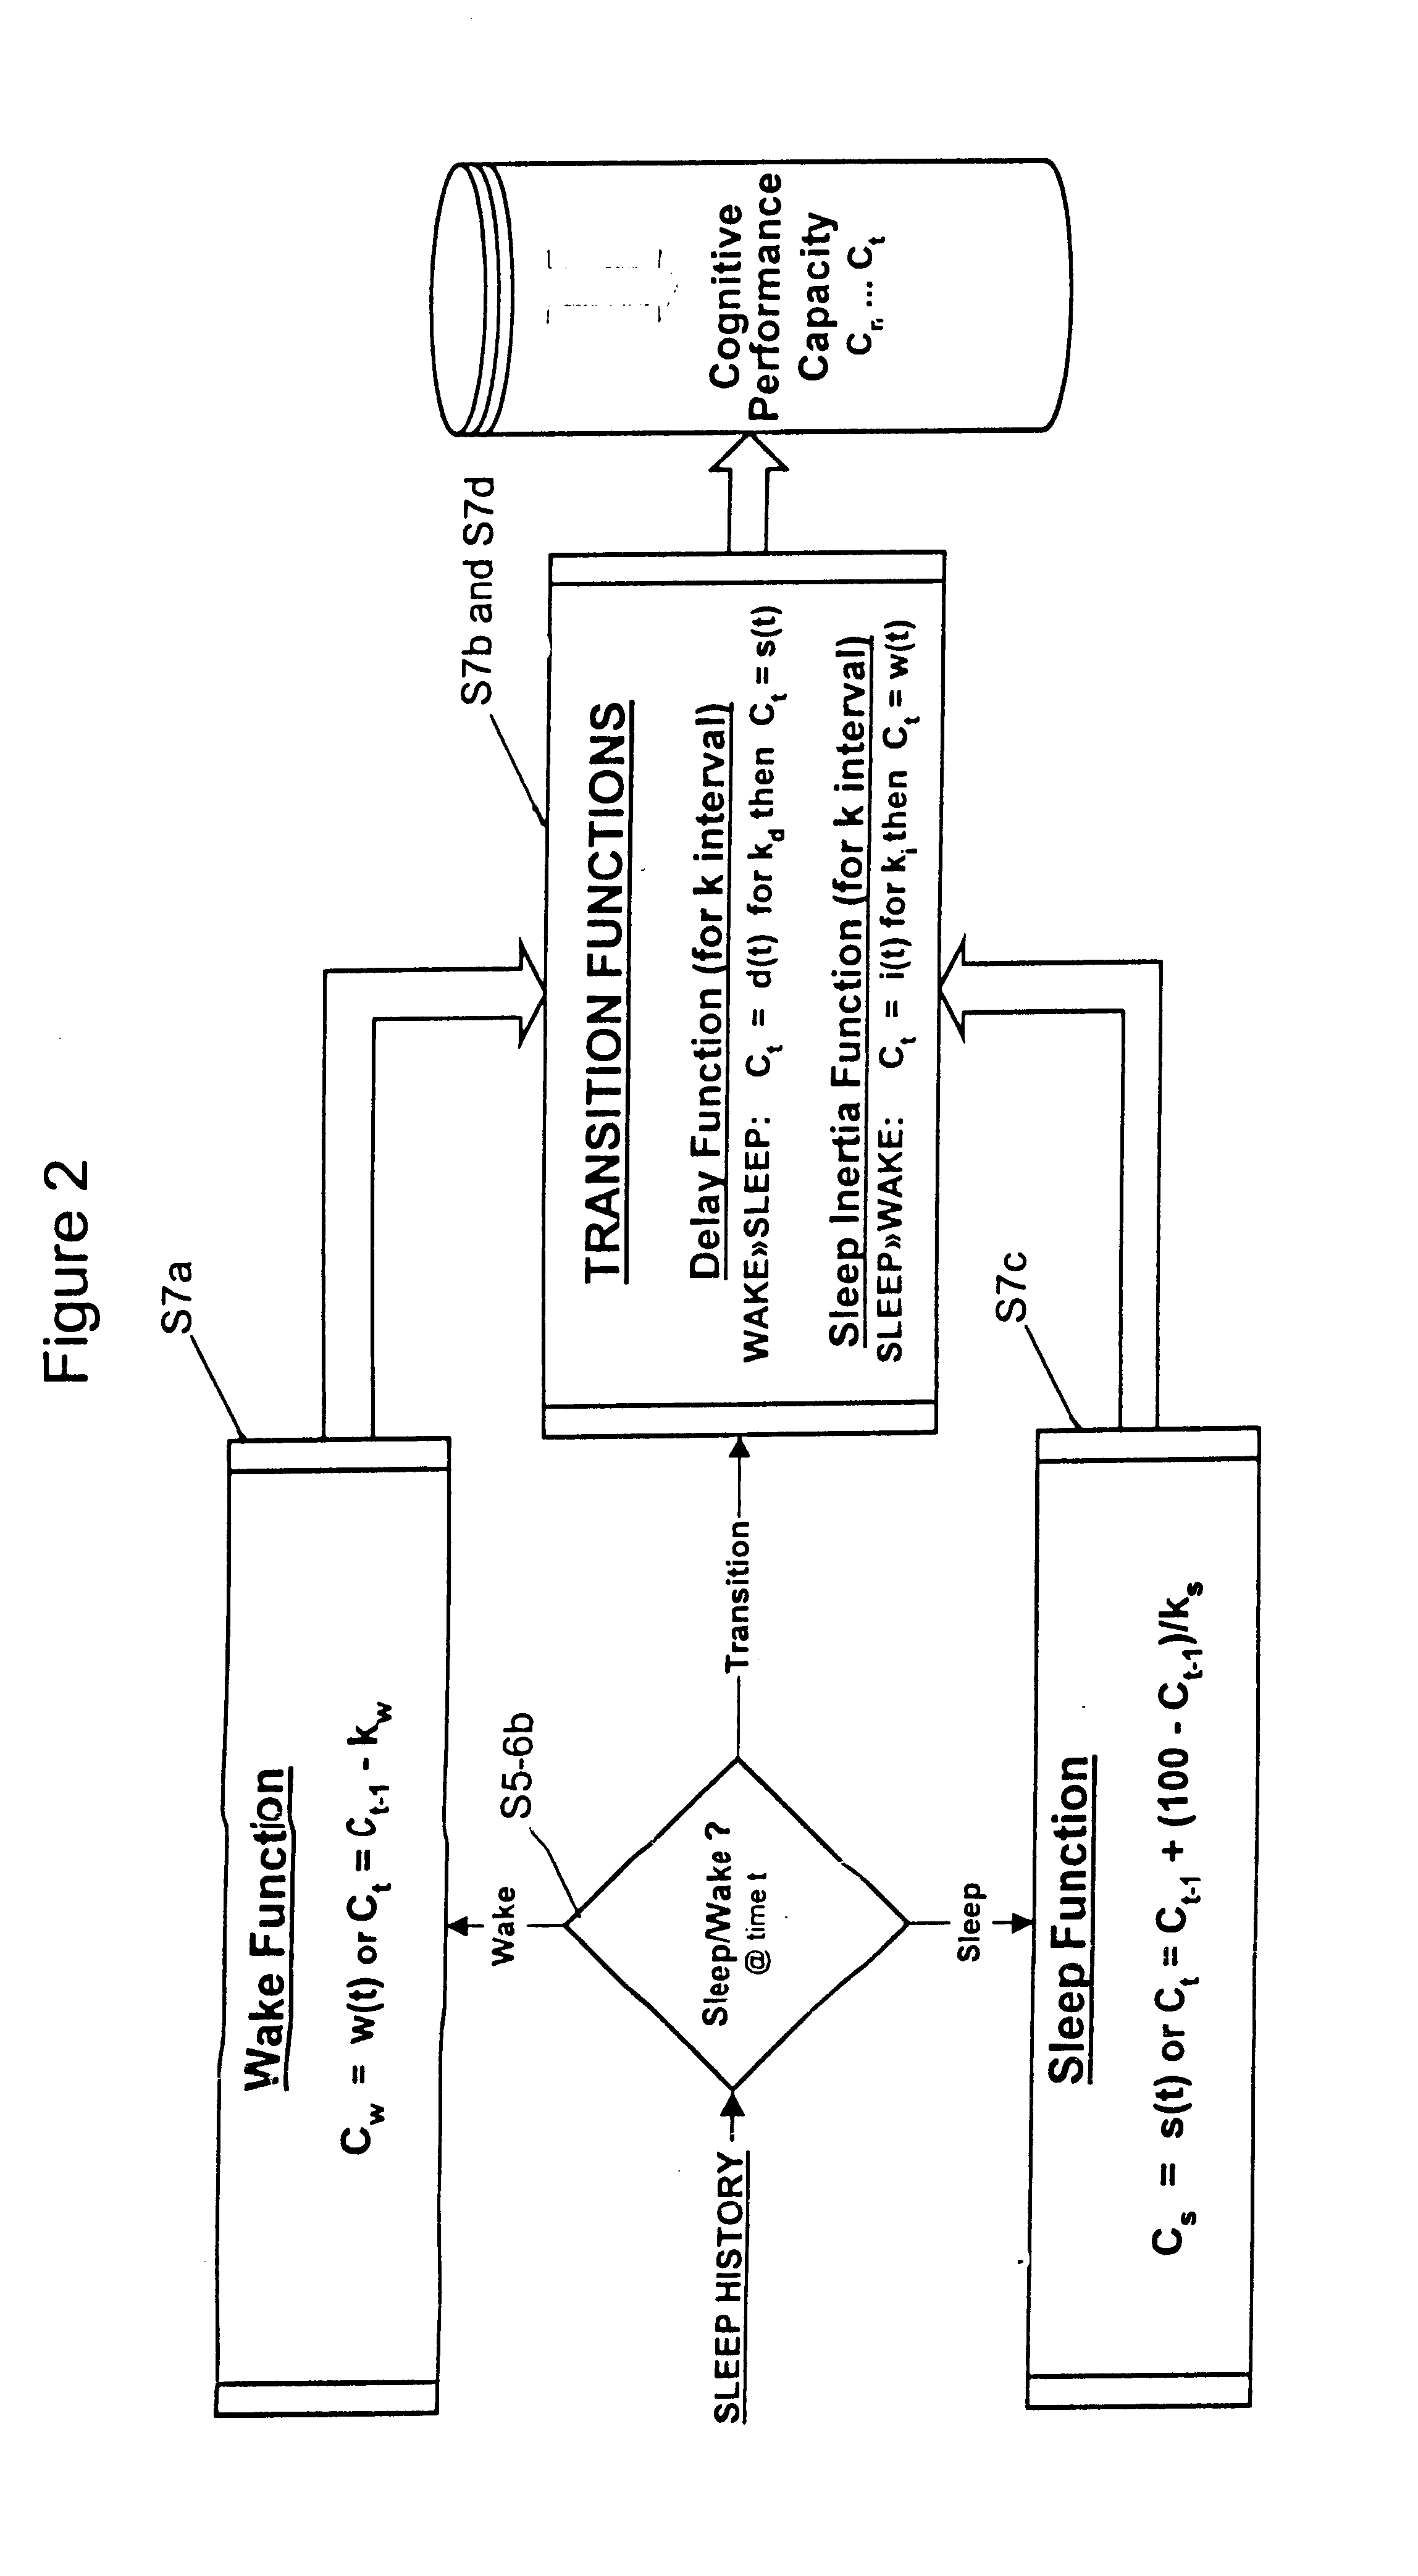 Method for predicting human cognitive performance